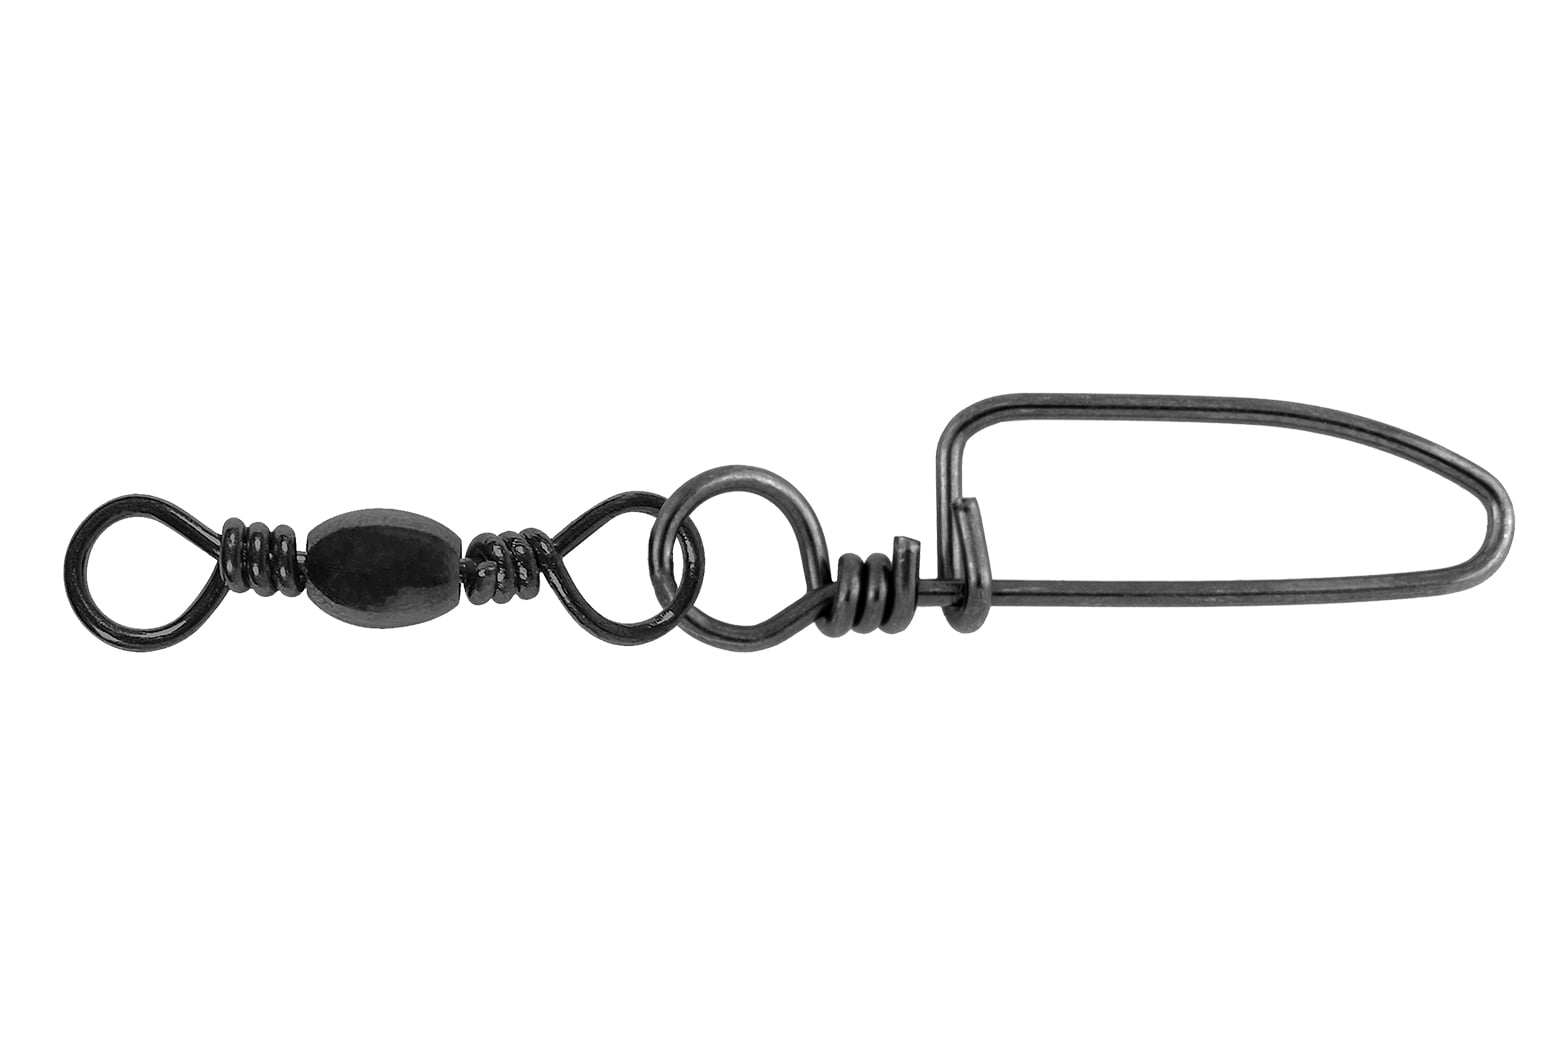 25 BLACK SNAP SWIVELS BARREL SWIVEL WITH SAFETY SNAP SIZE 12 SNAPS QUICK CLIP 